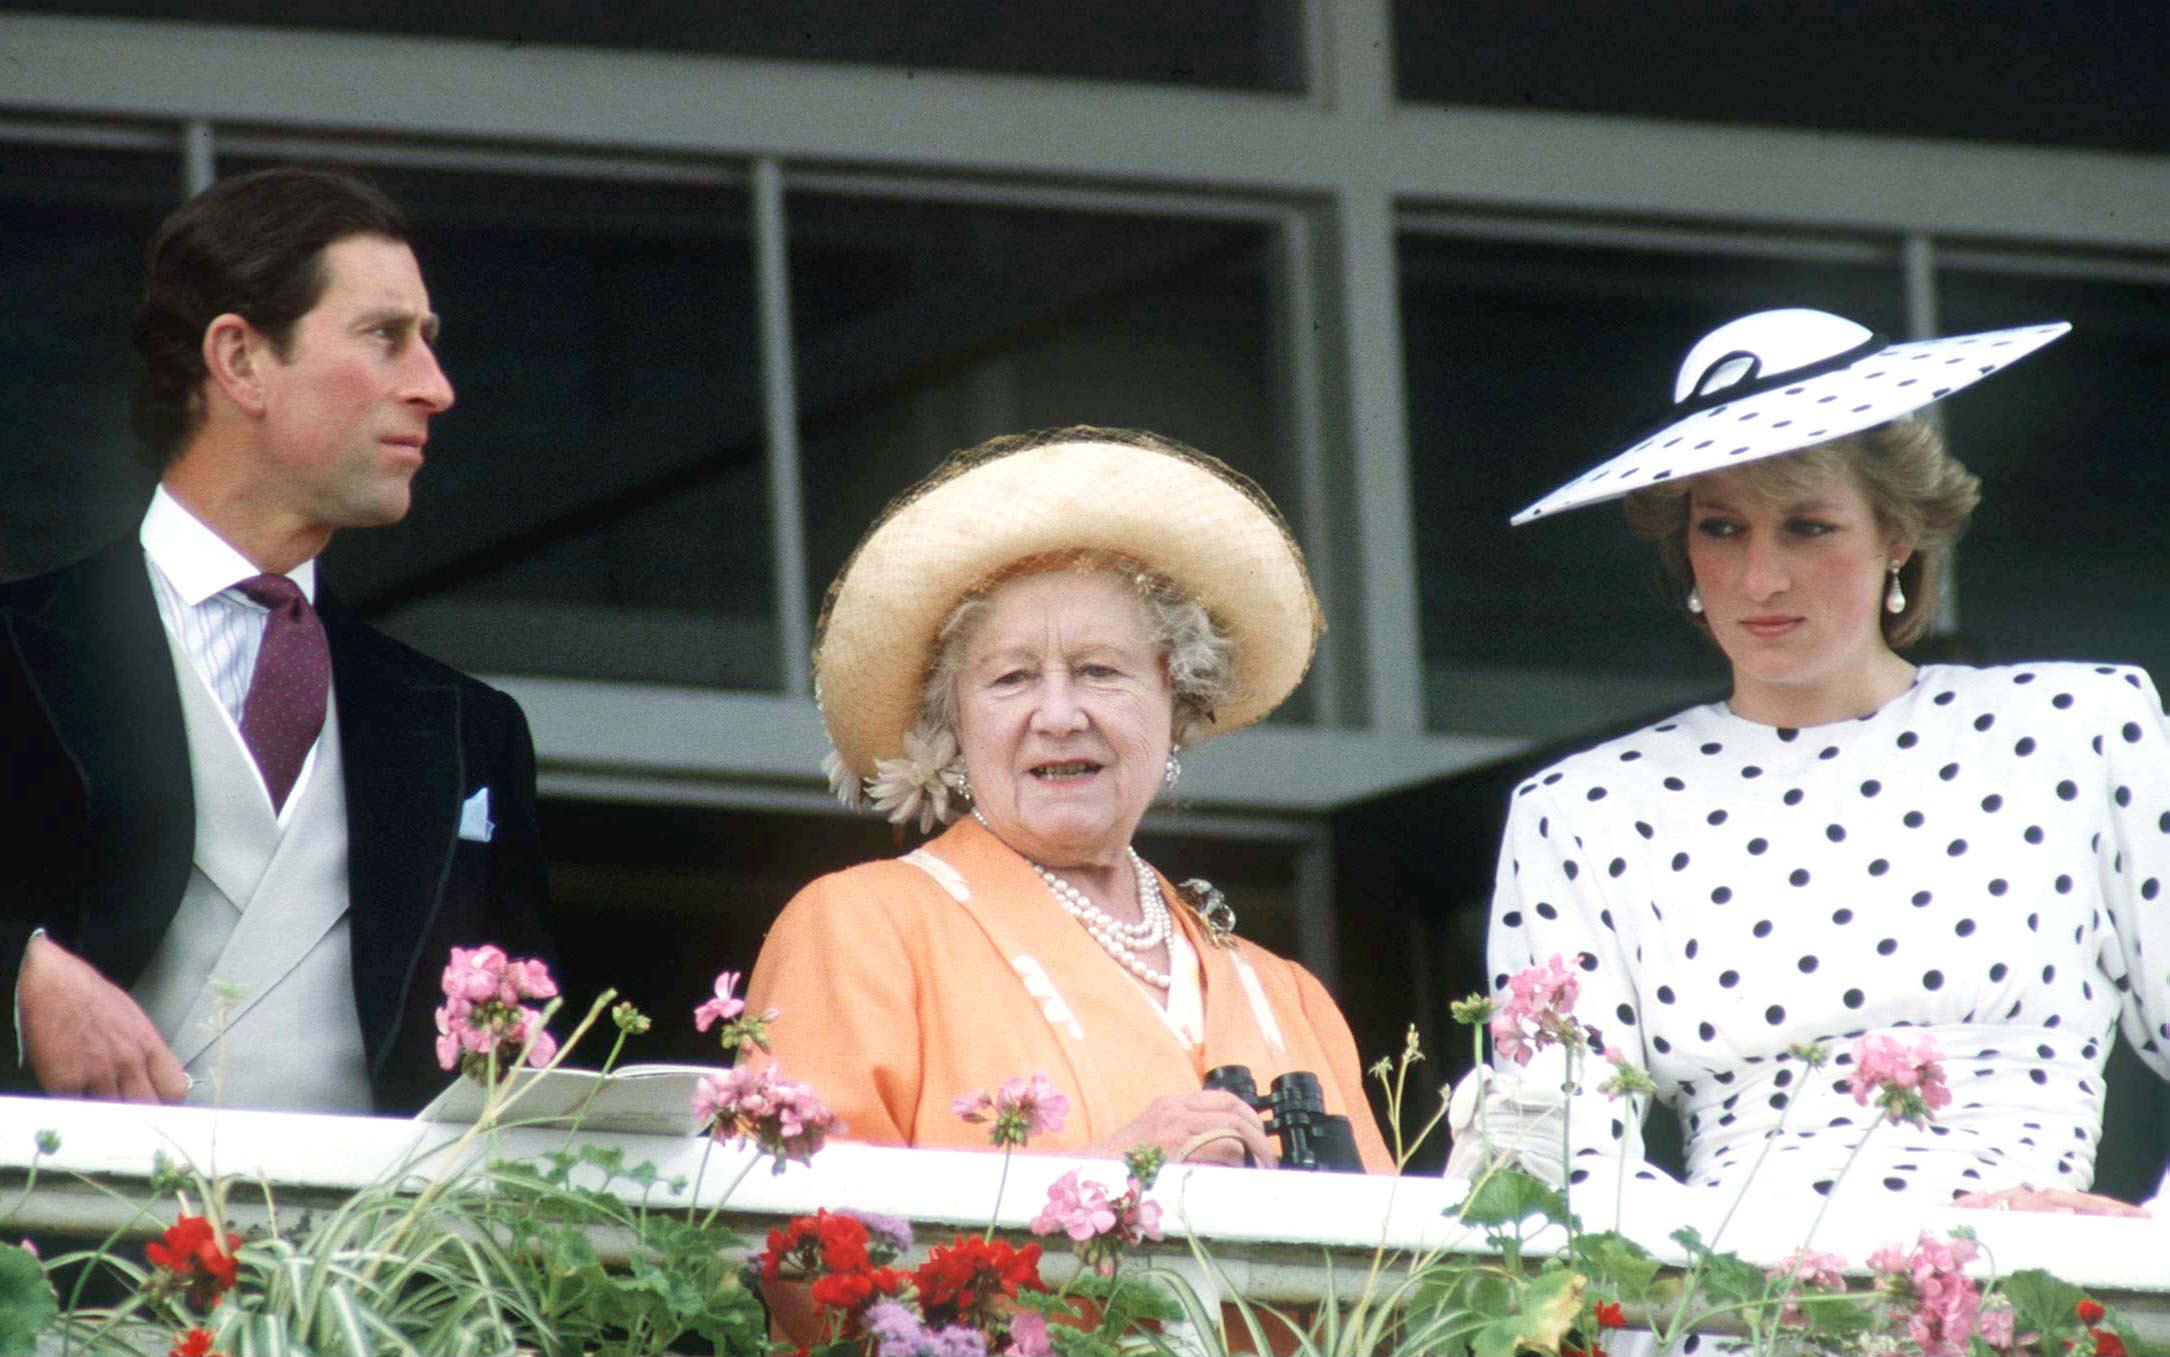 The Queen Mother with Prince Charles and Princess Diana